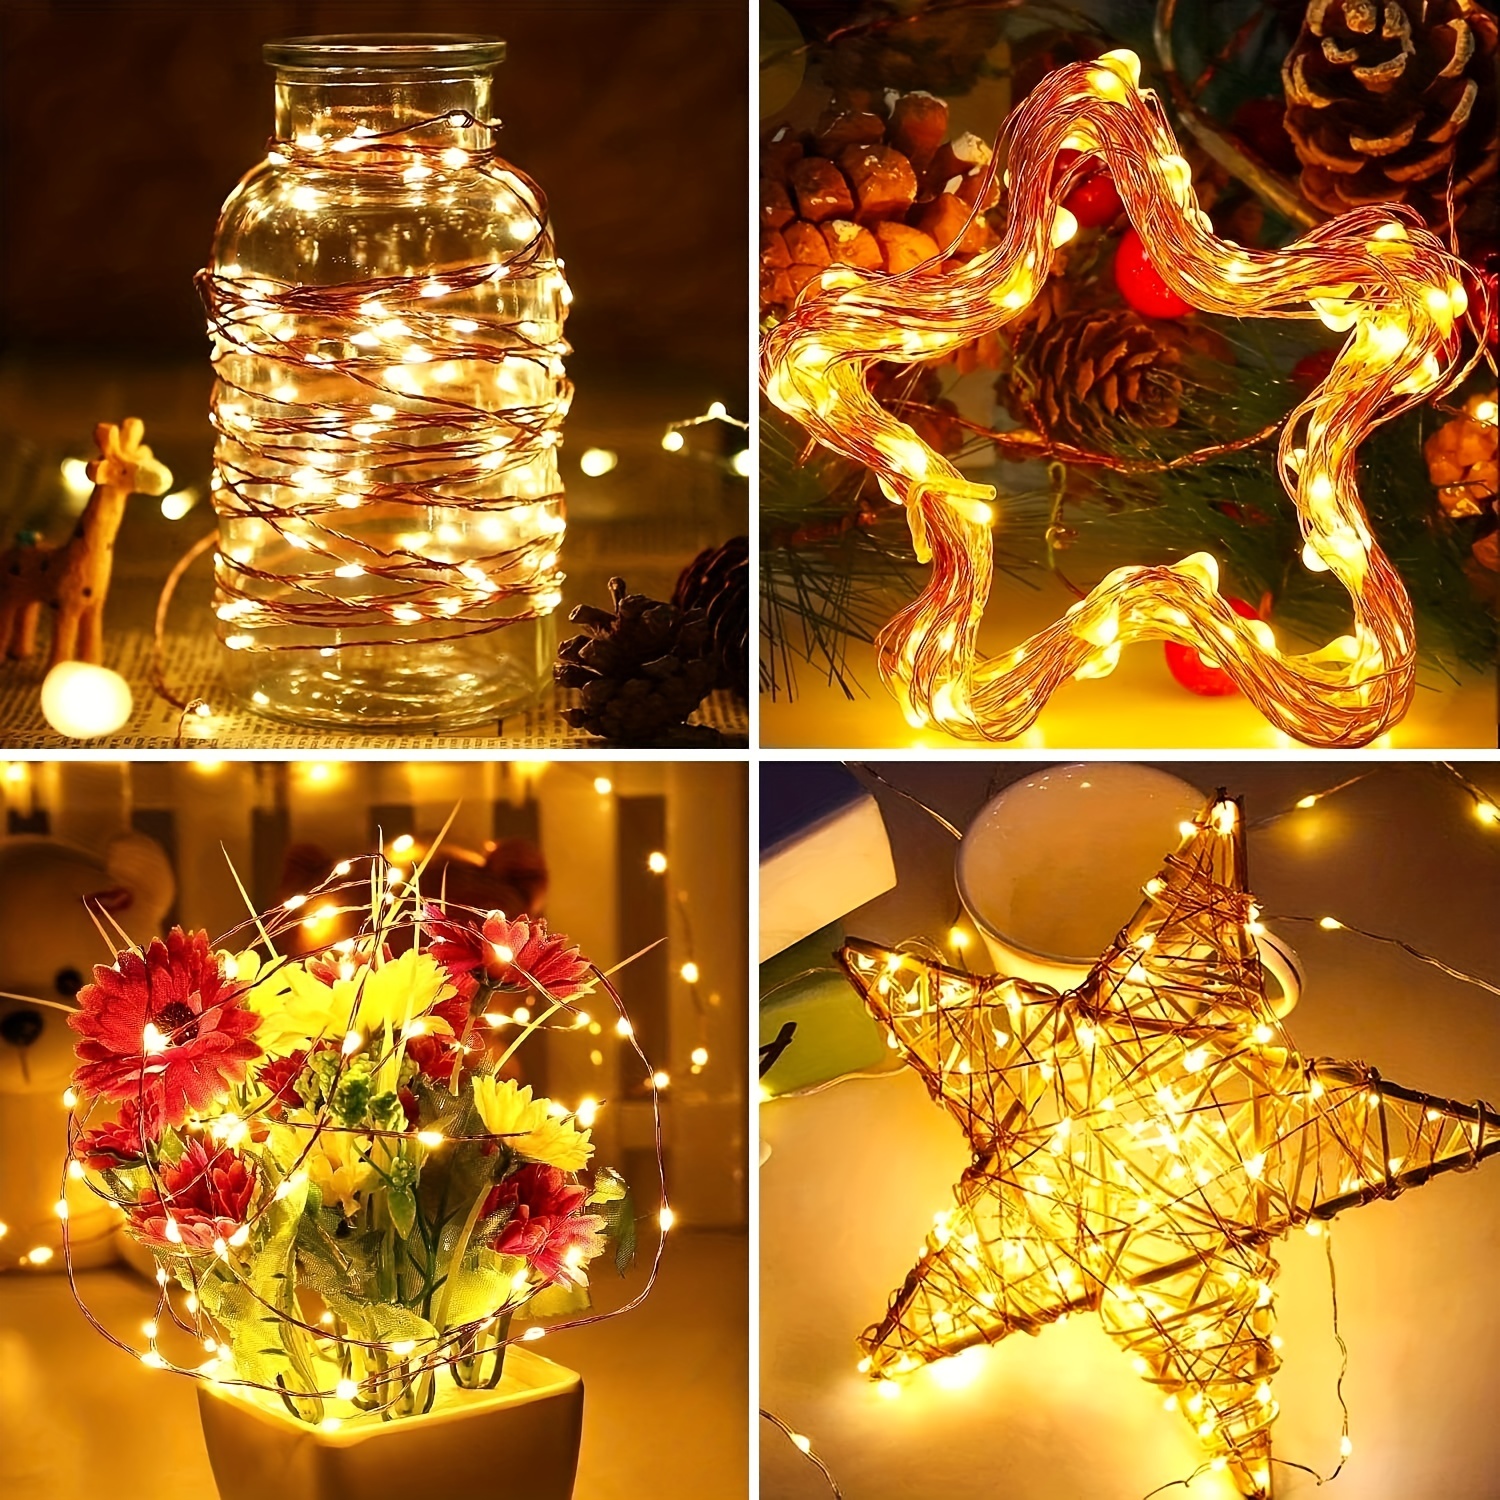 10 mini led string lights battery operated waterproof starry firefly lights perfect for home decor weddings details 3